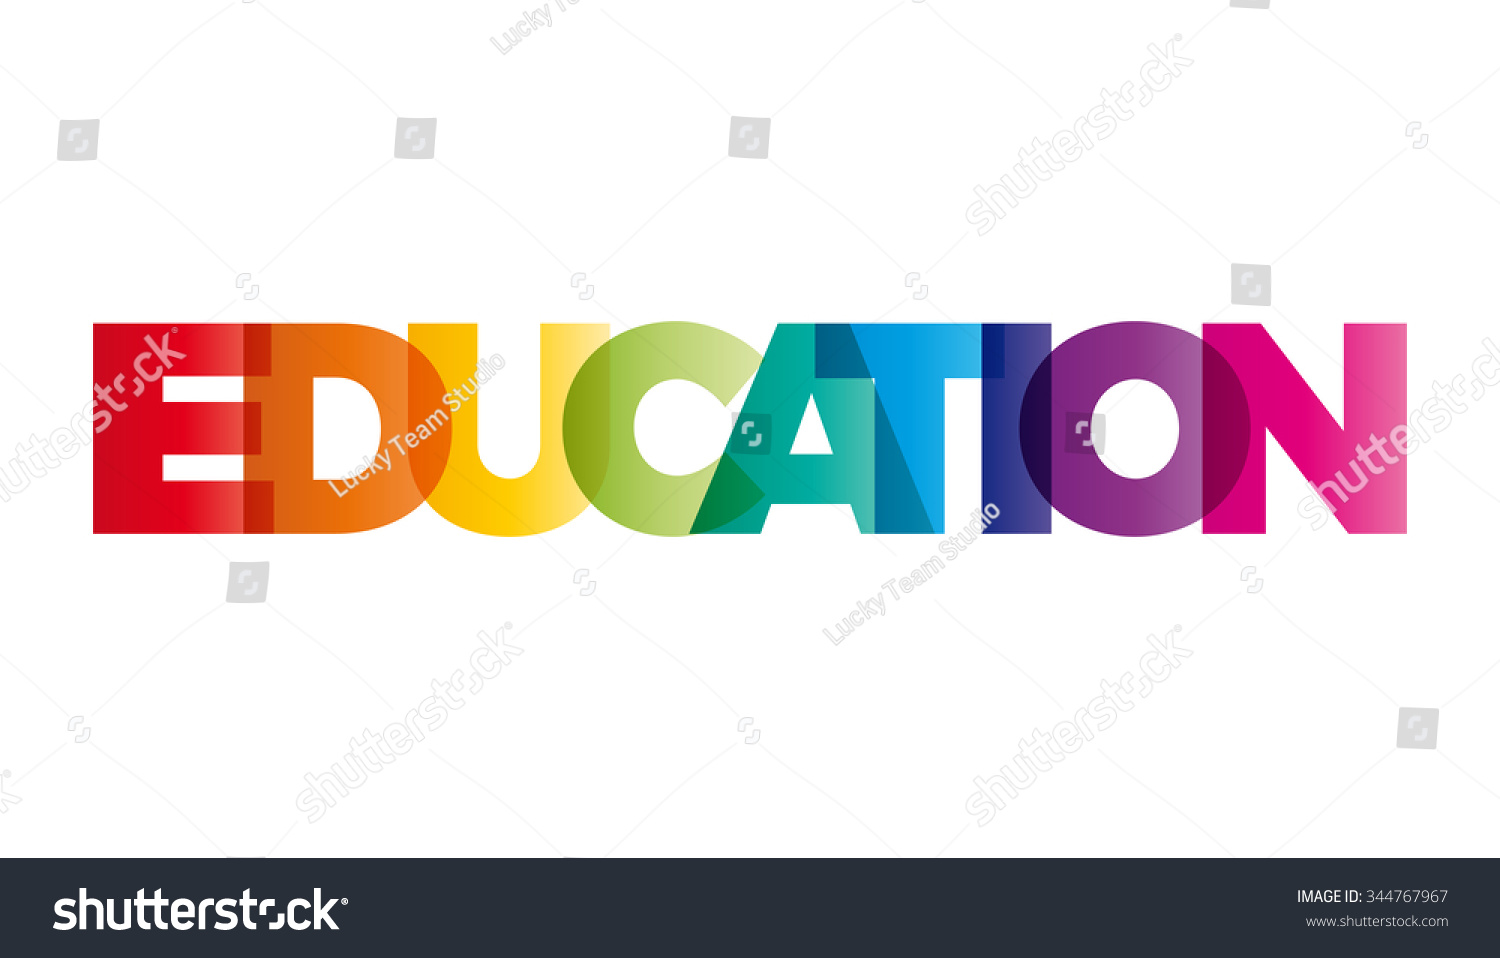 stock-vector-the-word-education-vector-banner-with-the-text-colored-rainbow-344767967.jpg